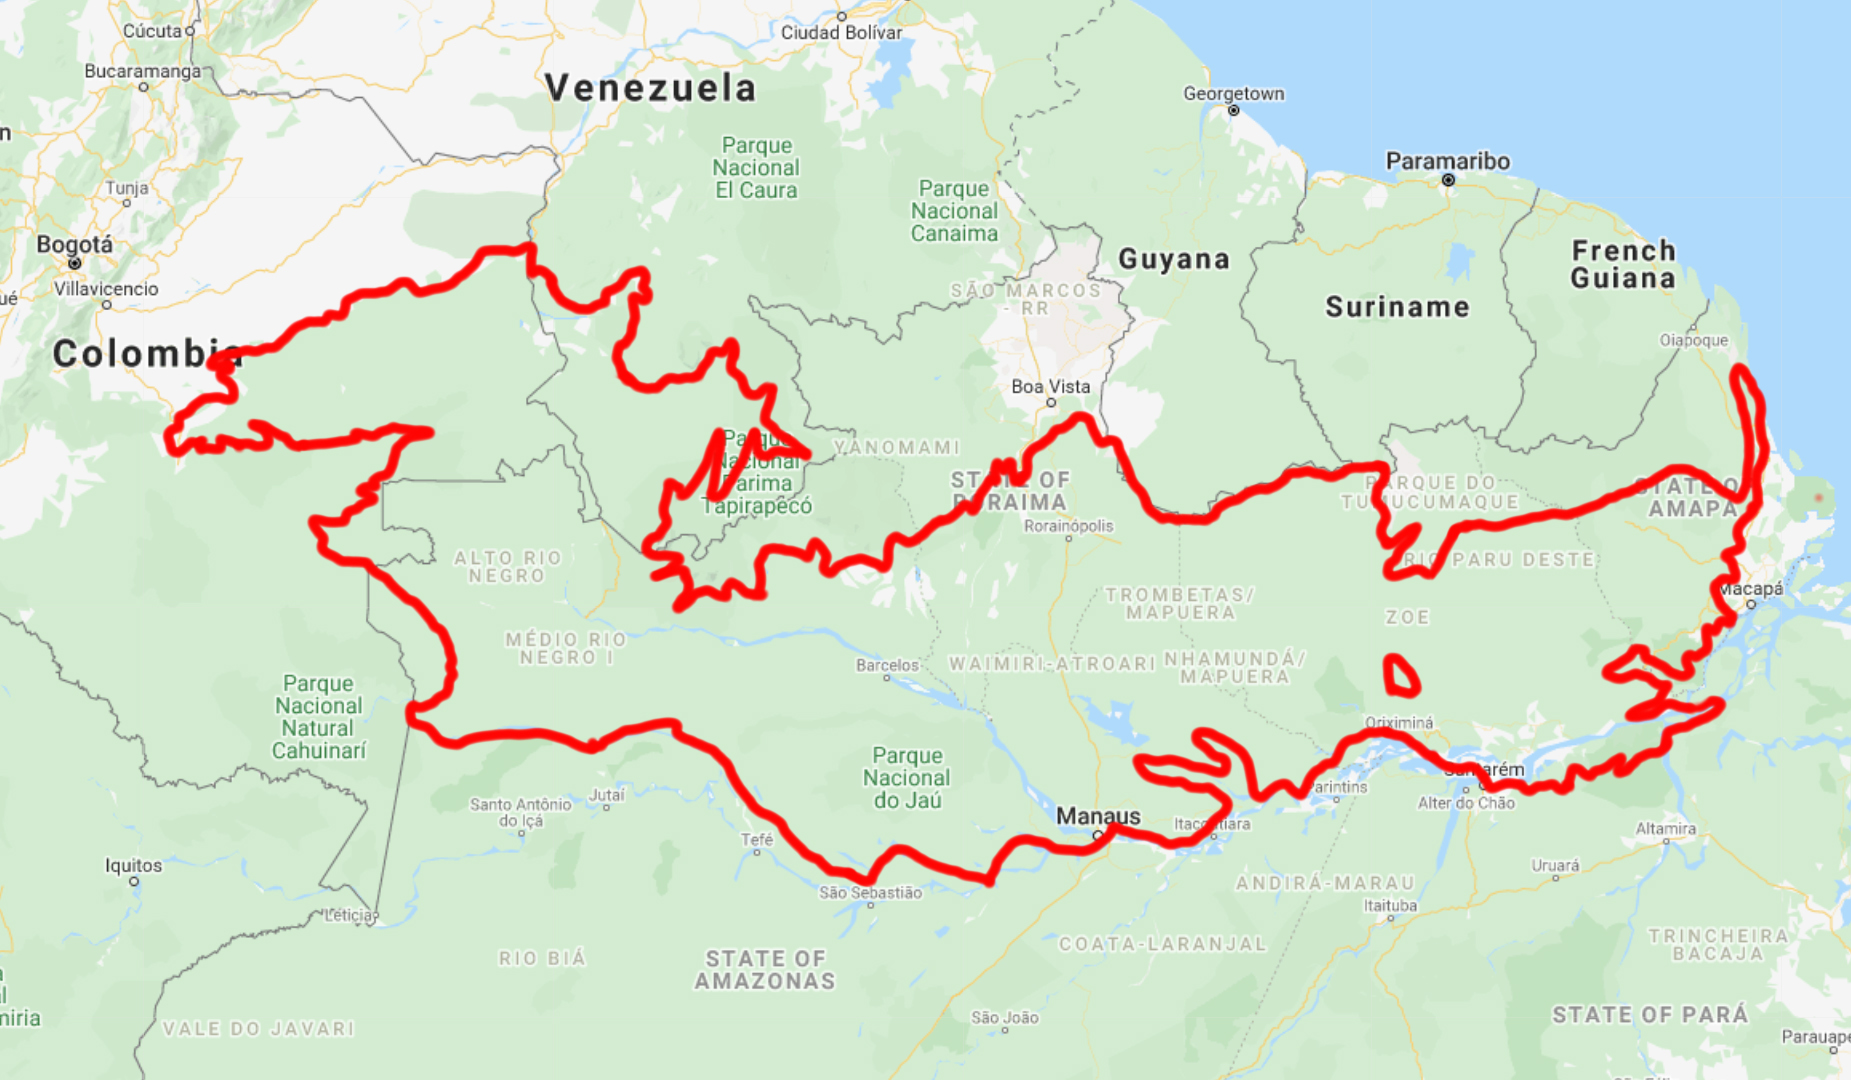 Outline of the Northern Amazonian Forests bioregion